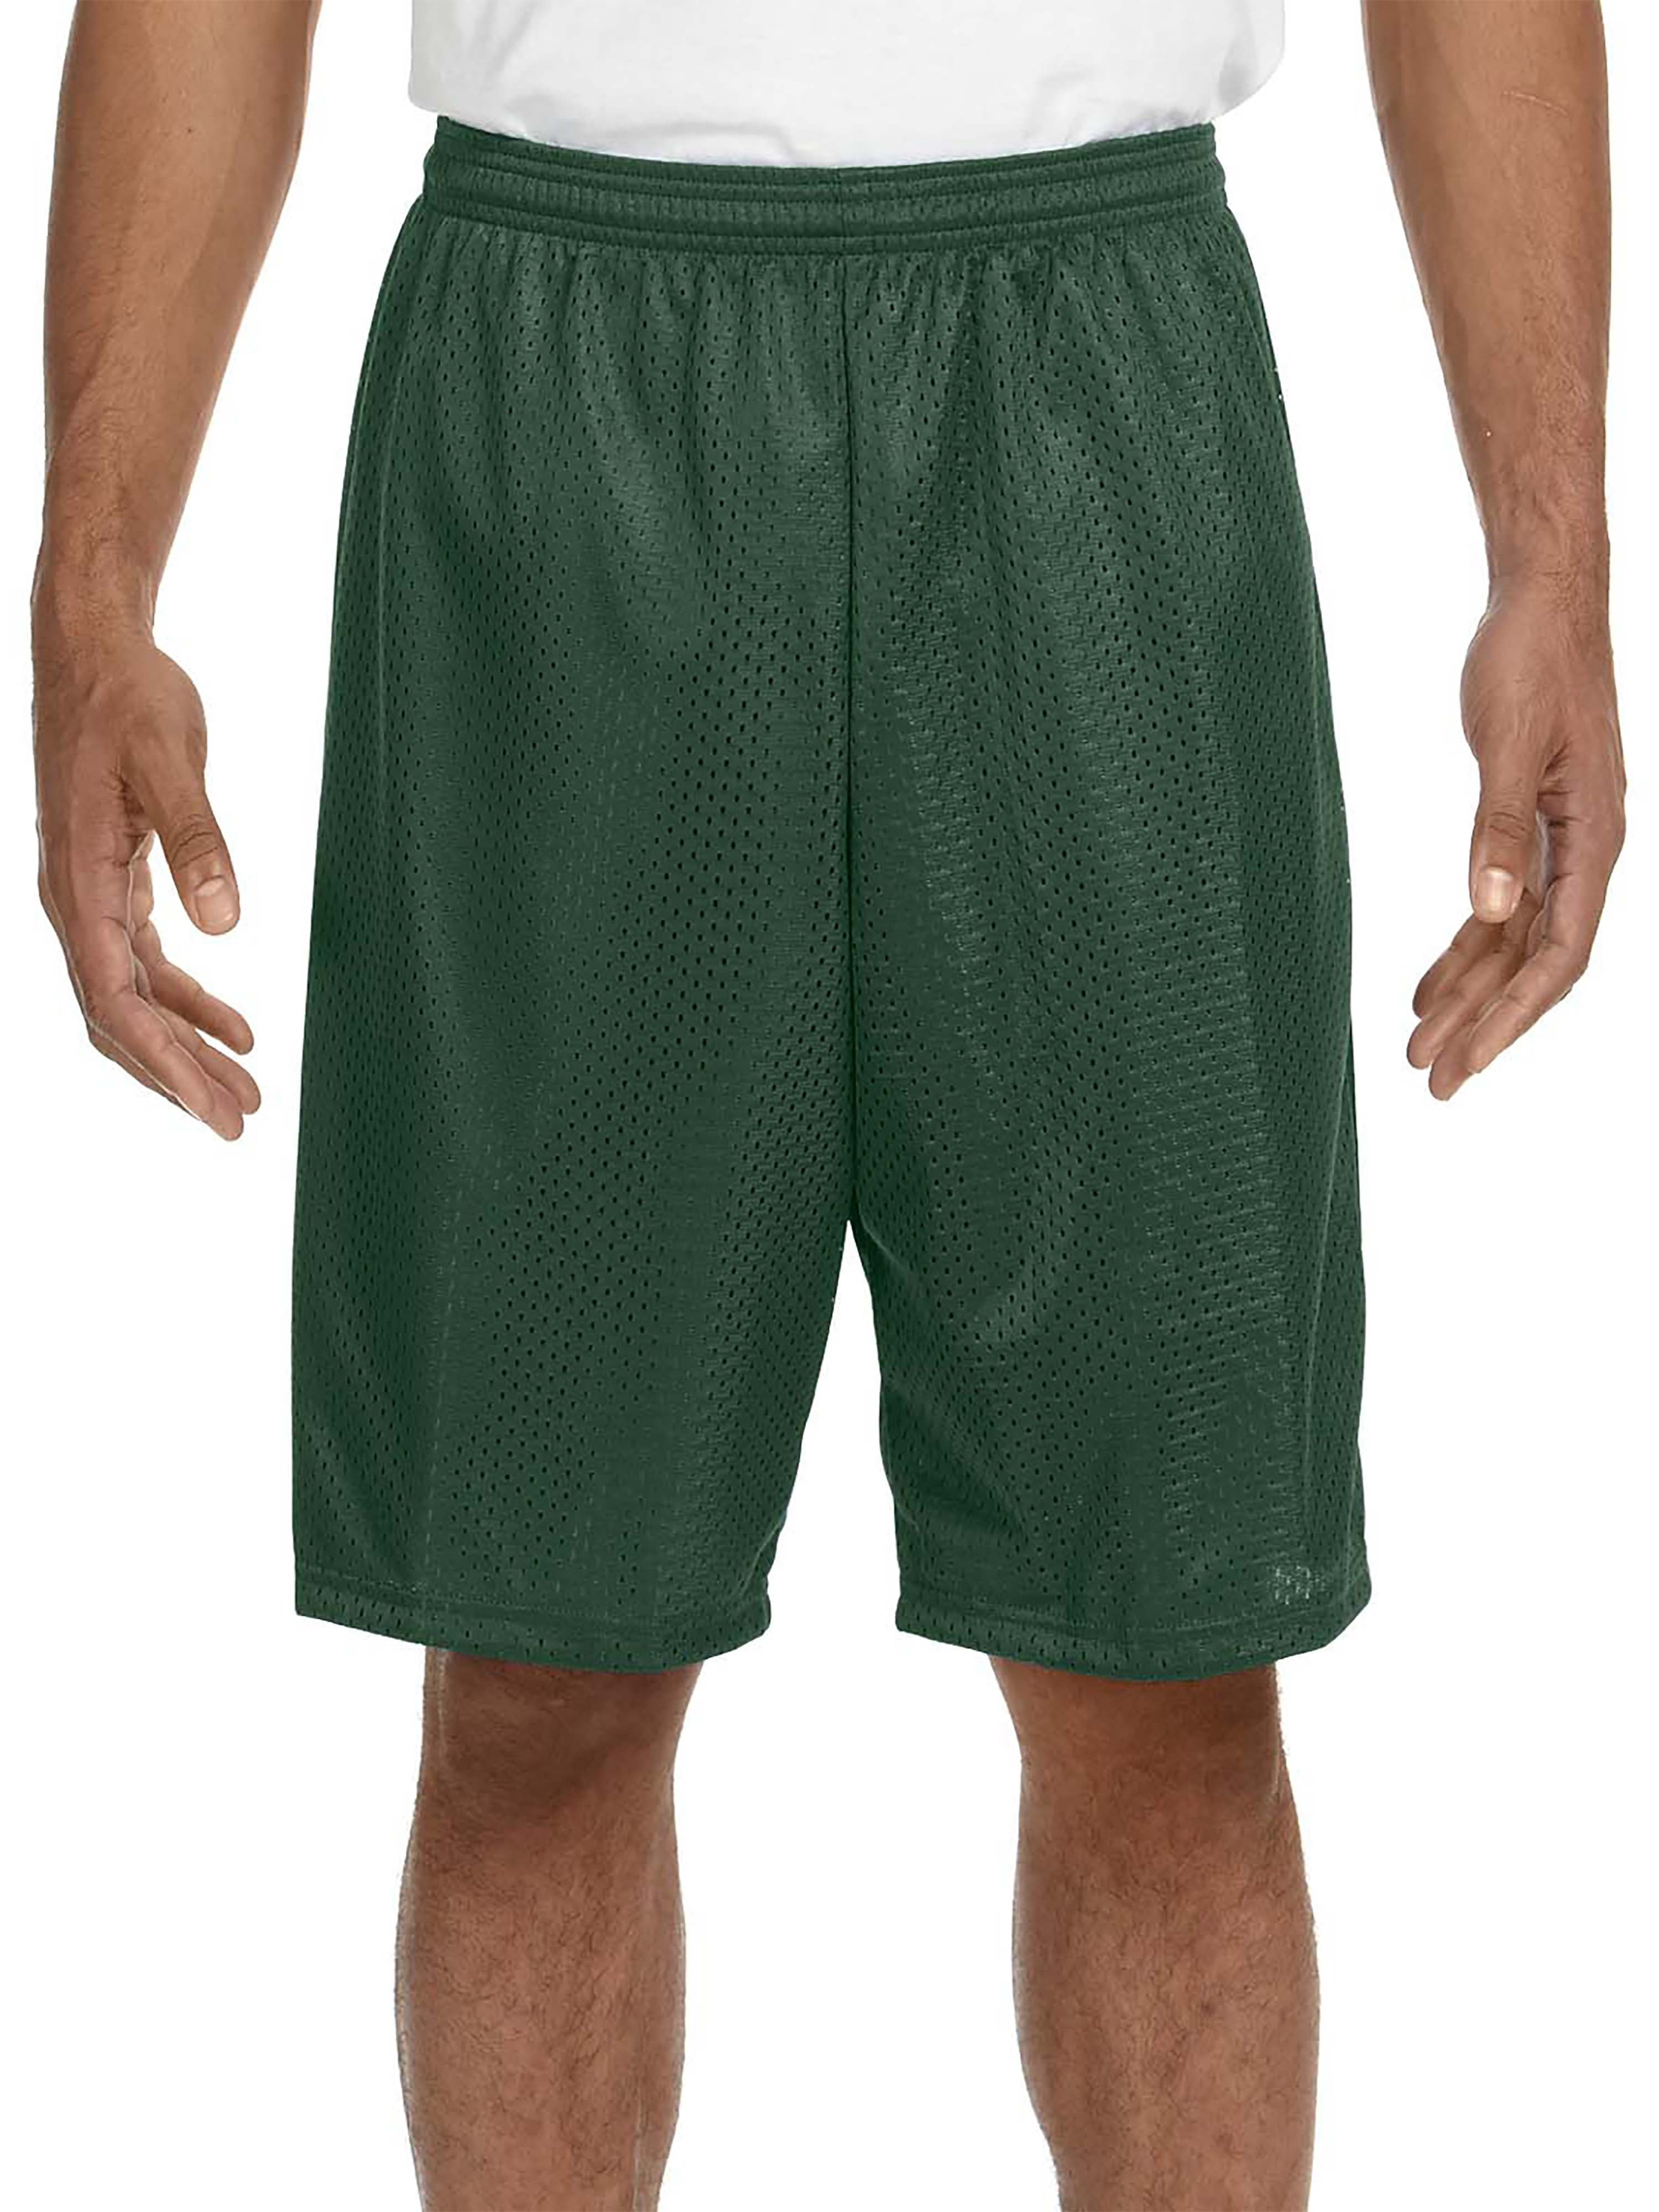 Ma Croix Men's Mesh Shorts With Pockets Gym Basketball Activewear ...